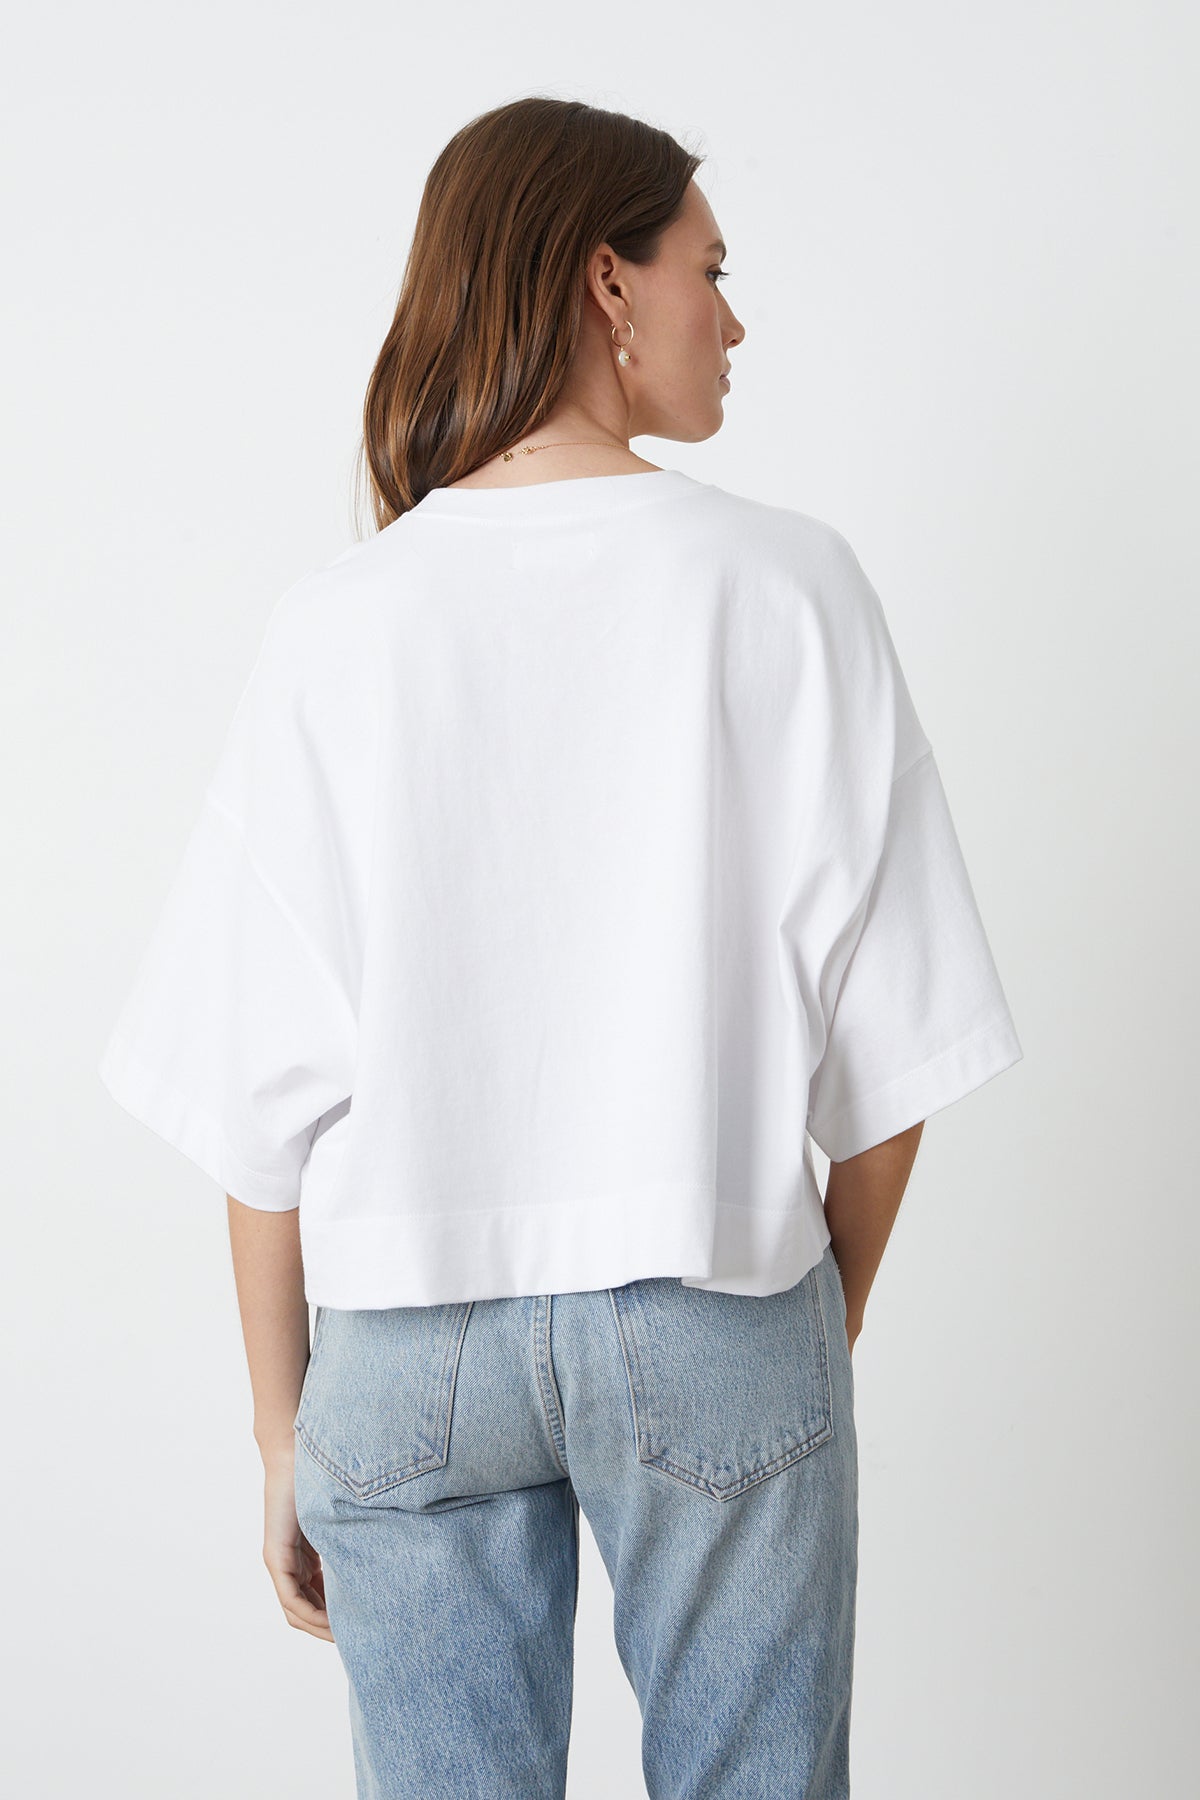 Aimee Cropped Tee with blue denim back-26255694790849